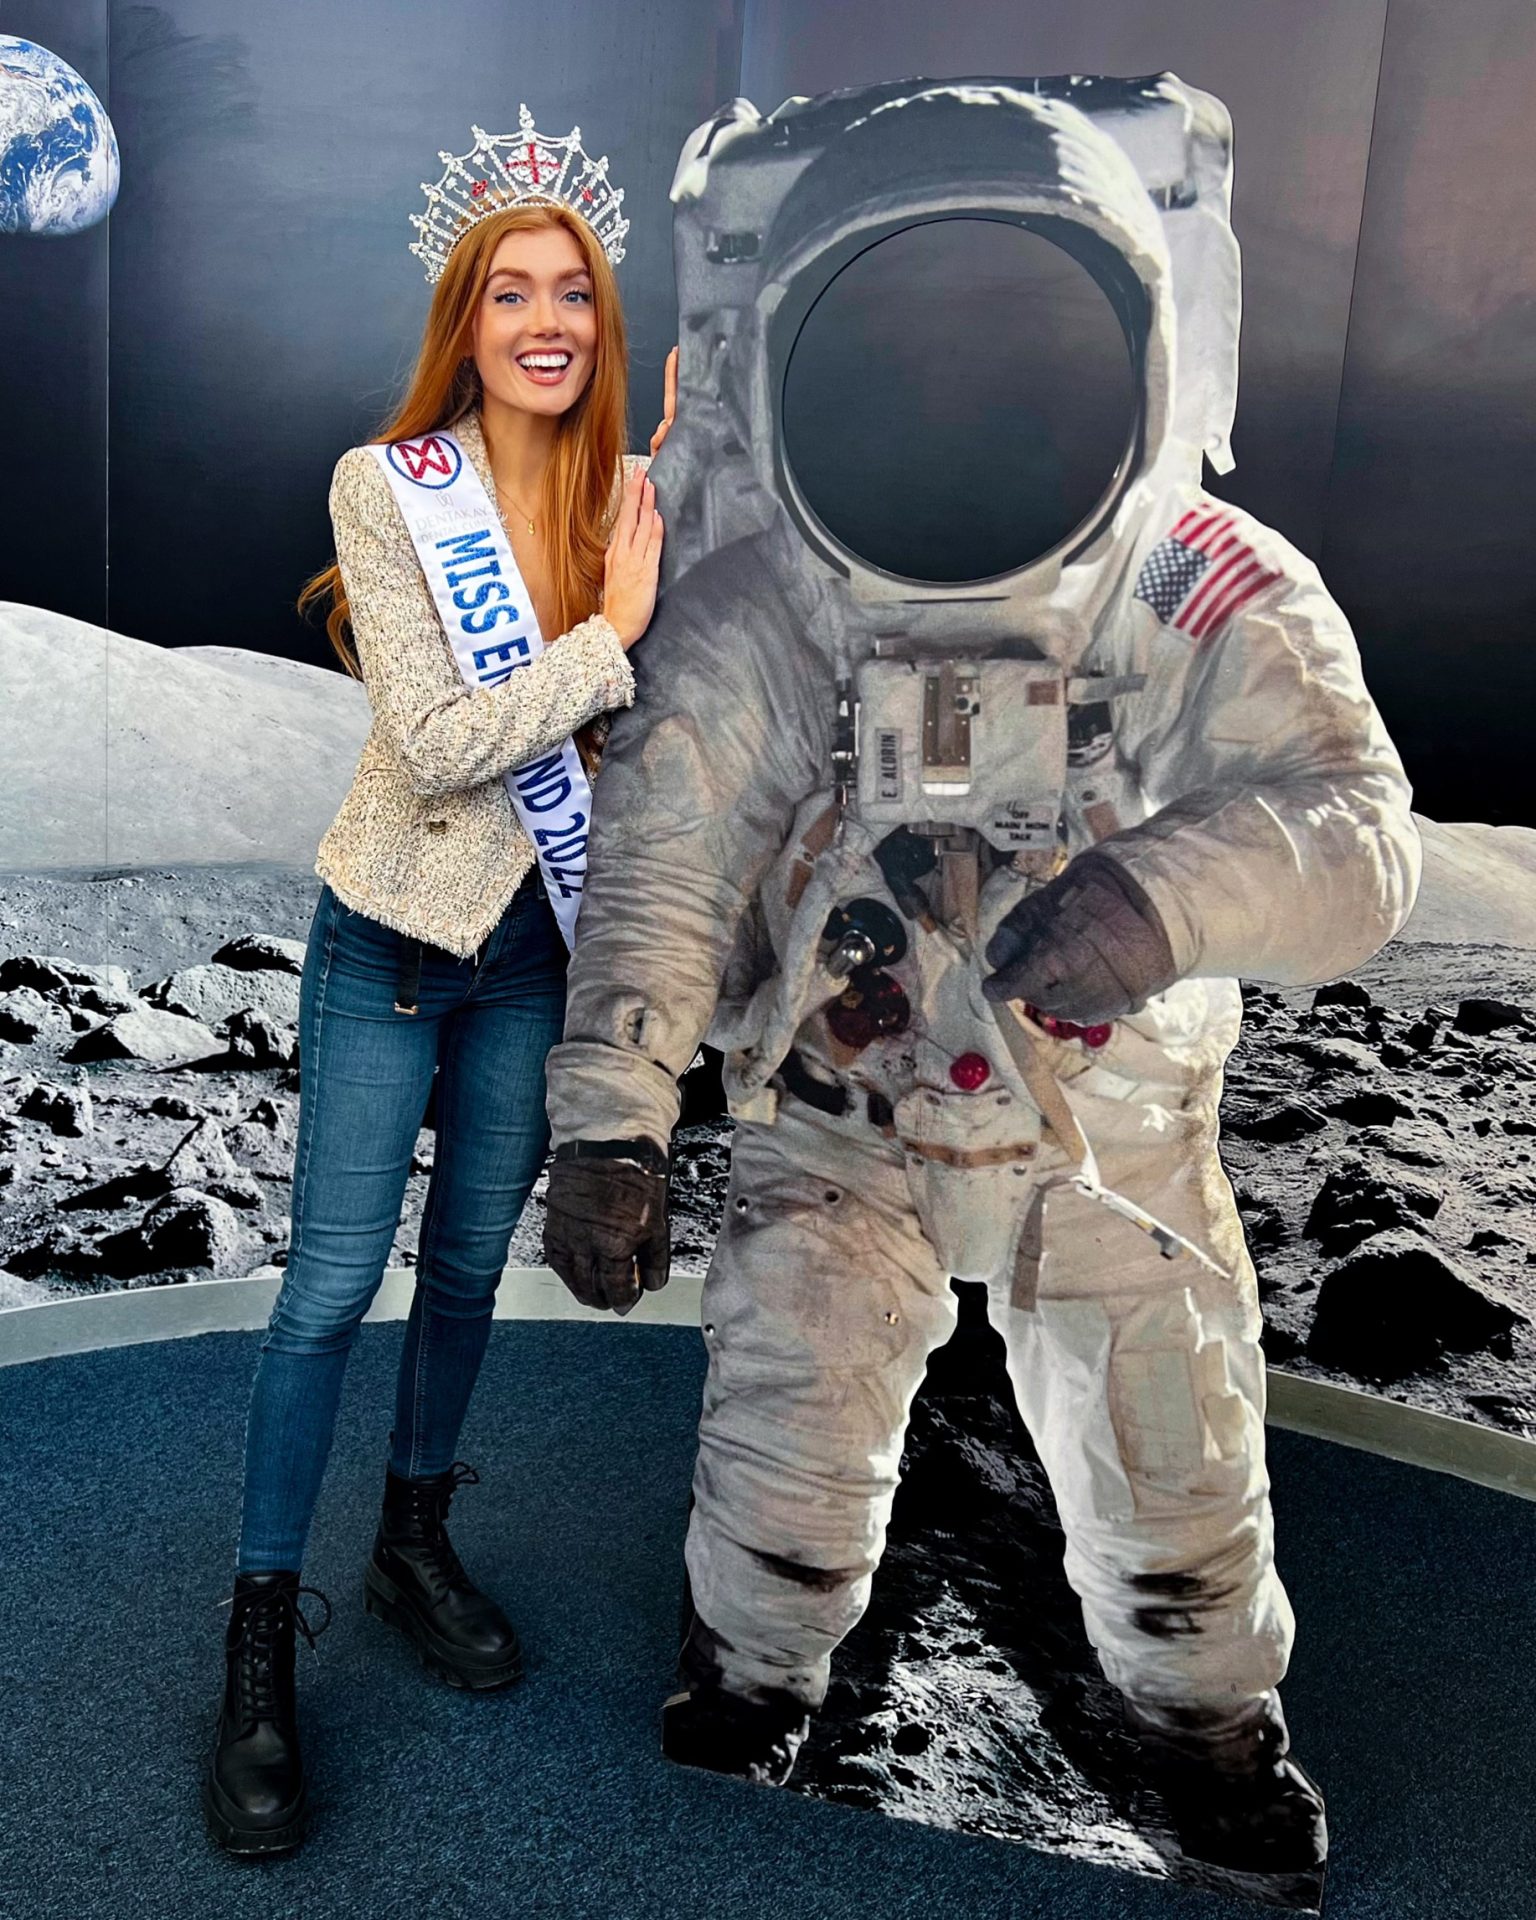 Miss England invited by the Comms Team at the ISS National lab to speak at ASCEND event in Las Vegas & watch rocket launch !